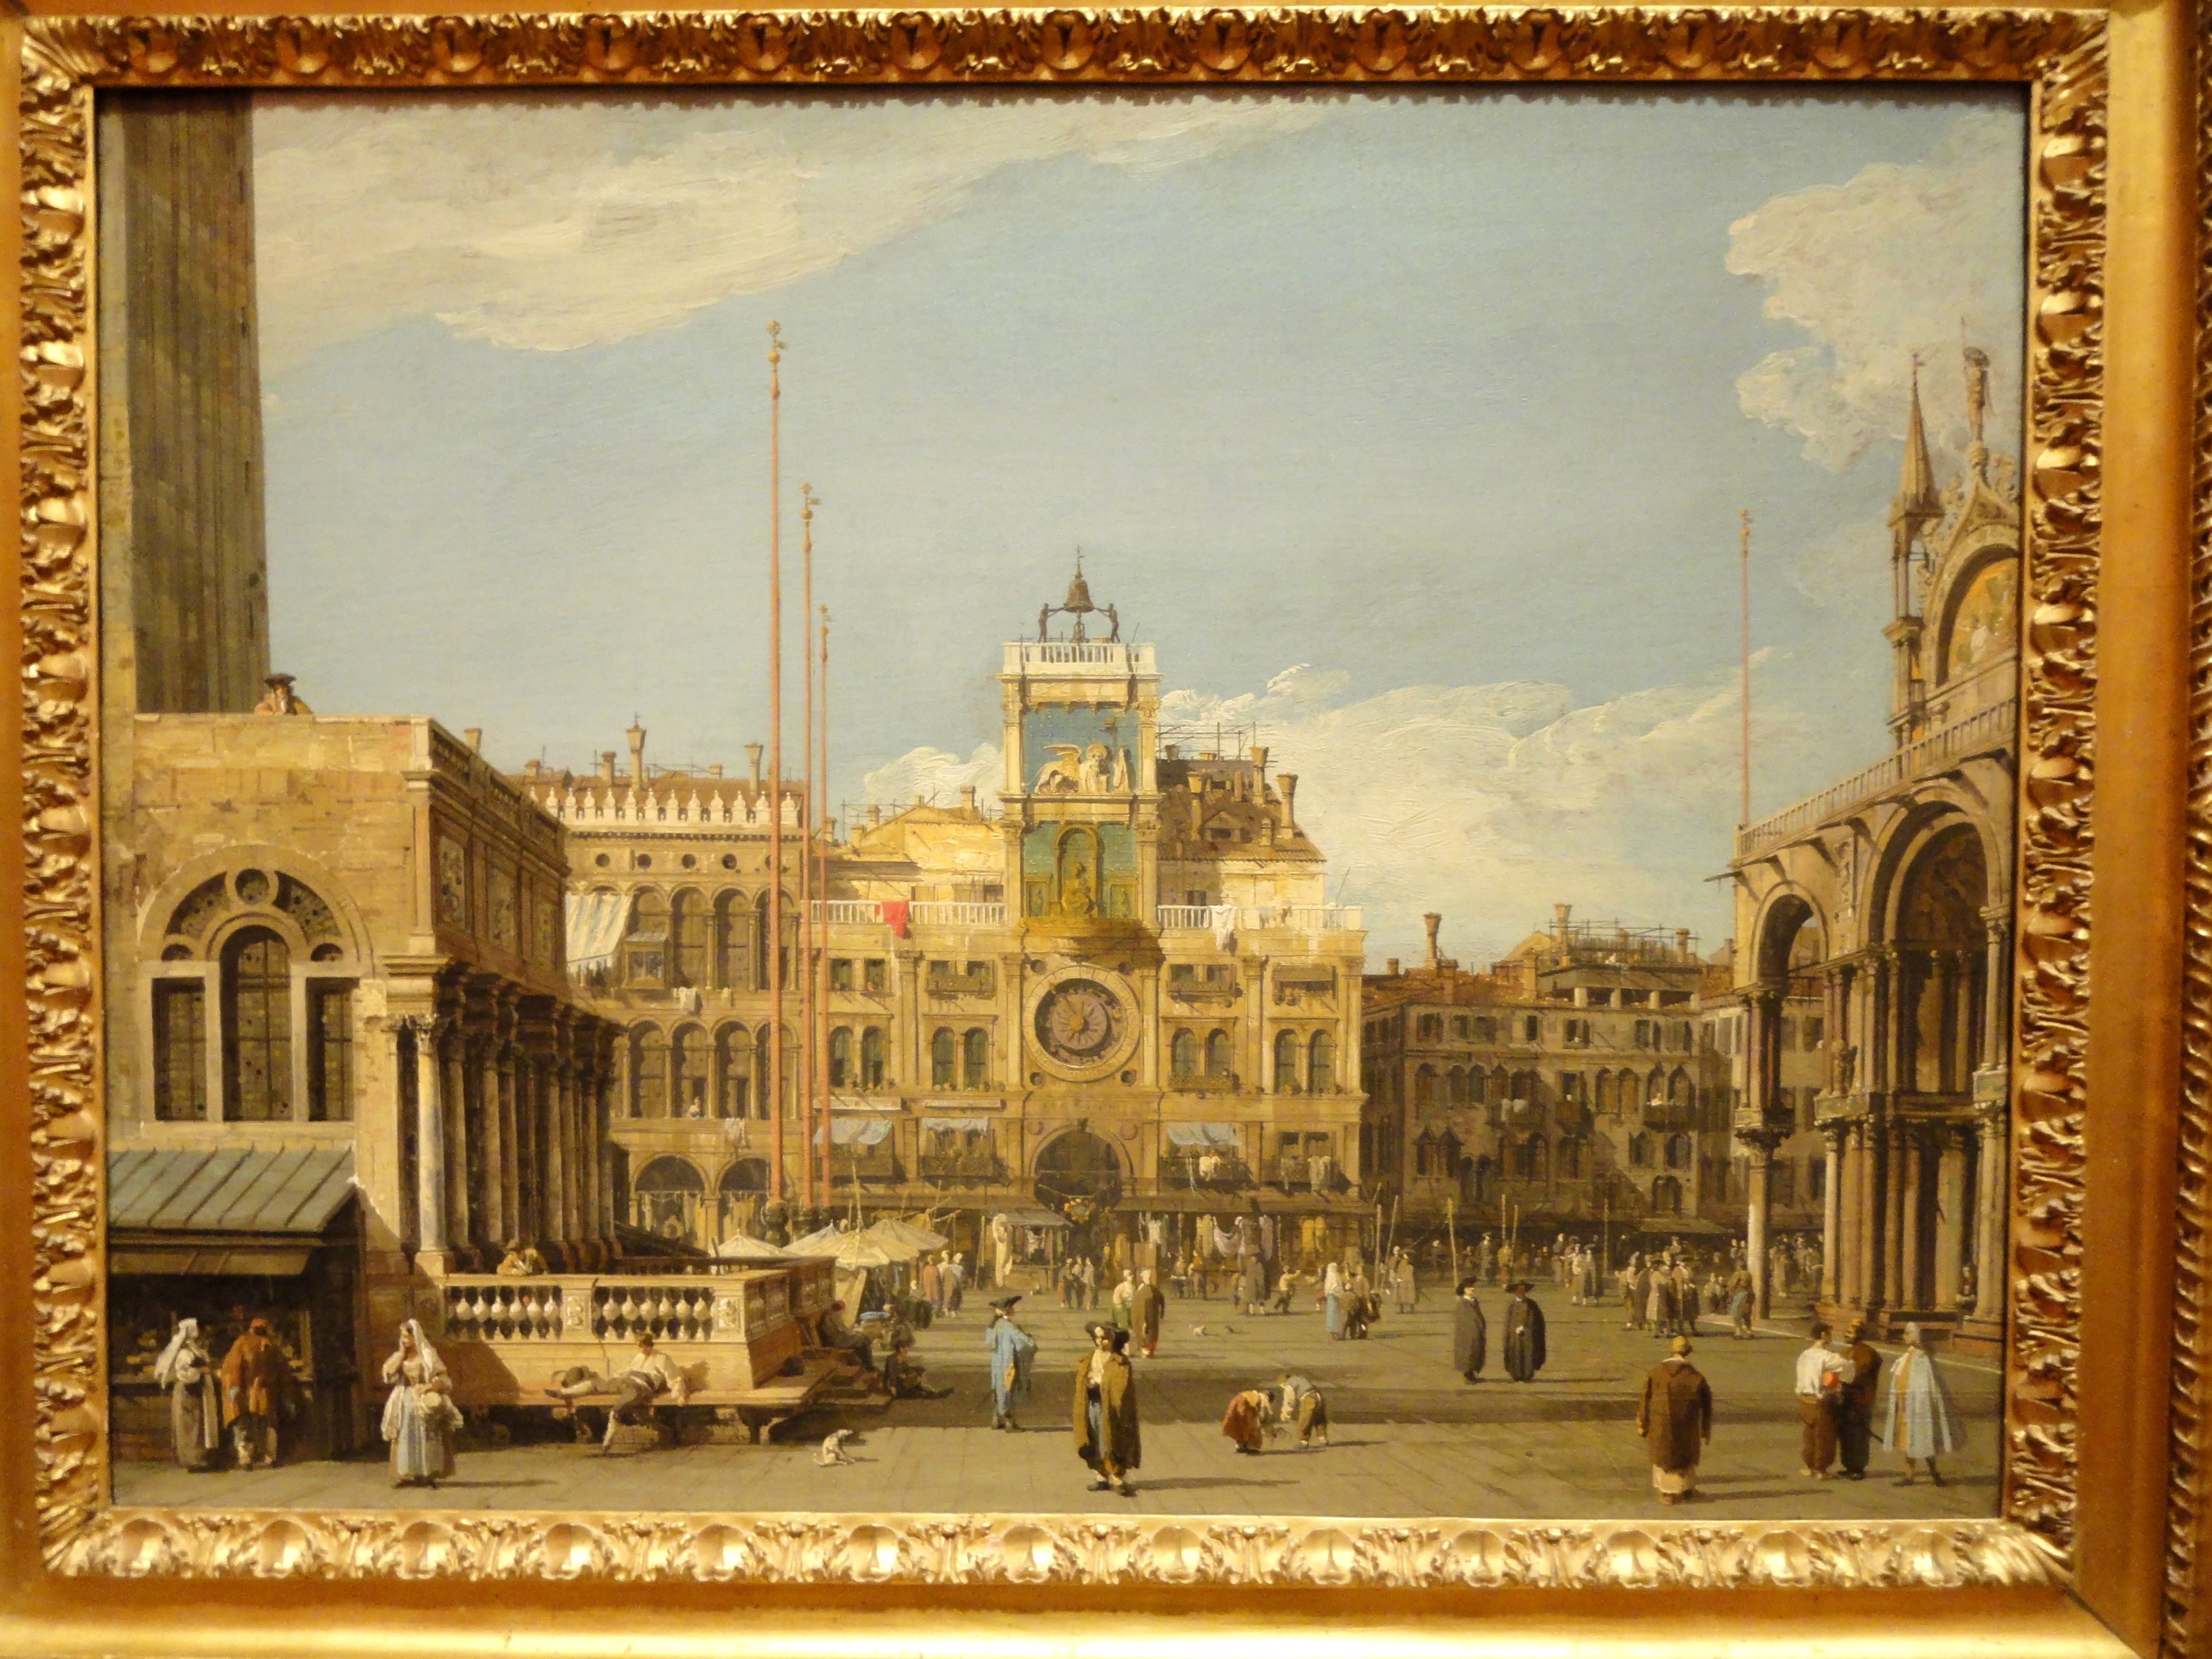 File:The Clock Tower in the Piazza San Marco, Canaletto, 1728-1730 